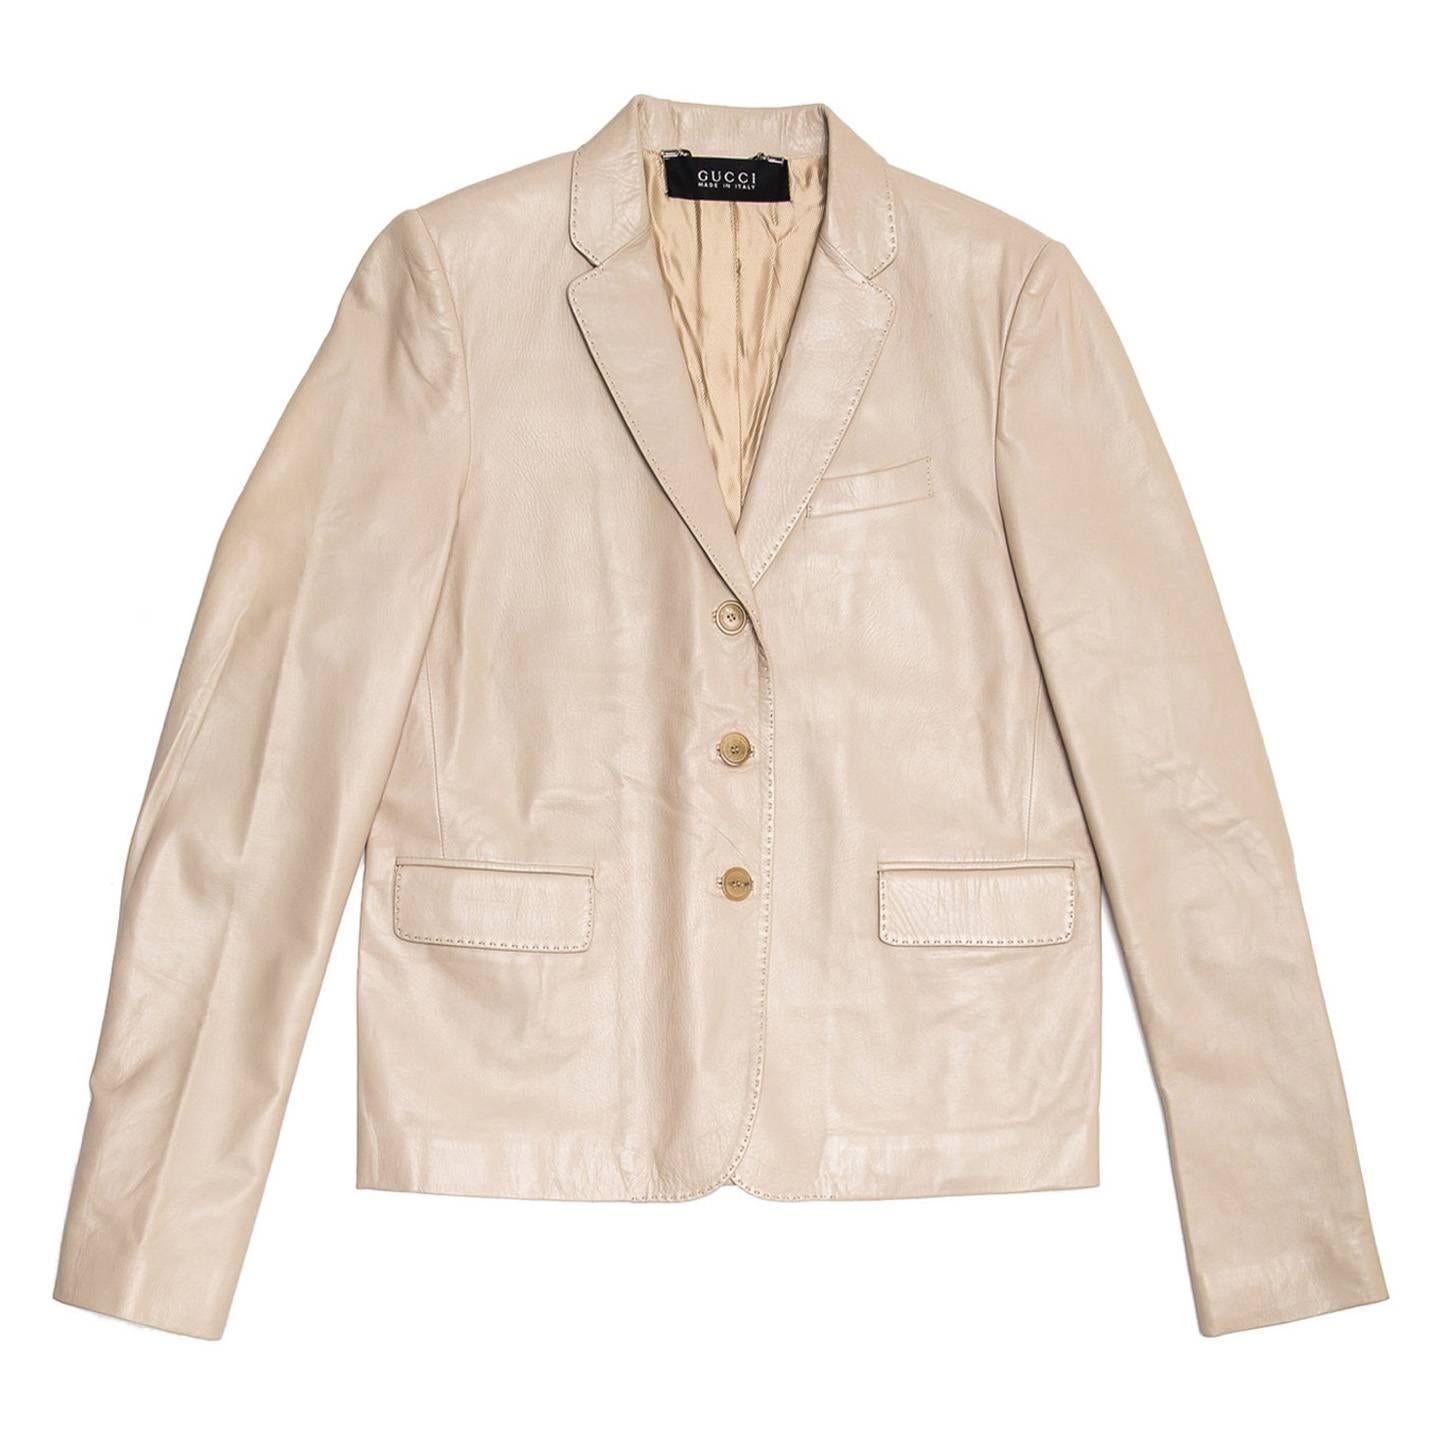 Khaki leather boxy jacket with small lapel, 3 button opening at front, a breast pocket and flap pockets at waist. The cuffs open with 3 light brown horn small buttons and the back has two vents. All the profiles on lapel, pockets and seams are